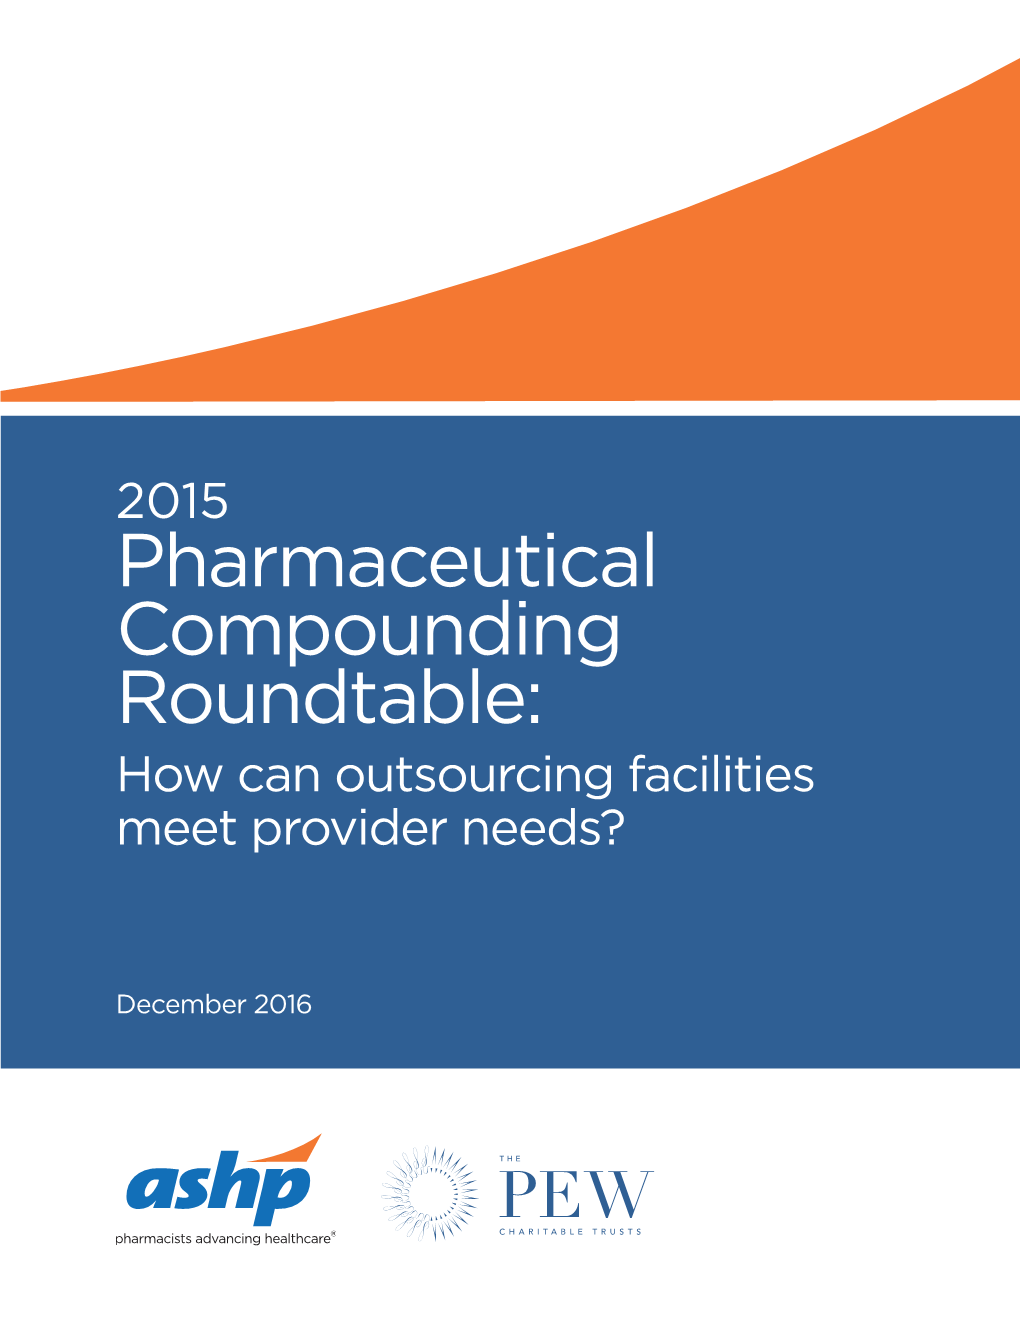 Pharmaceutical Compounding Roundtable: How Can Outsourcing Facilities Meet Provider Needs?